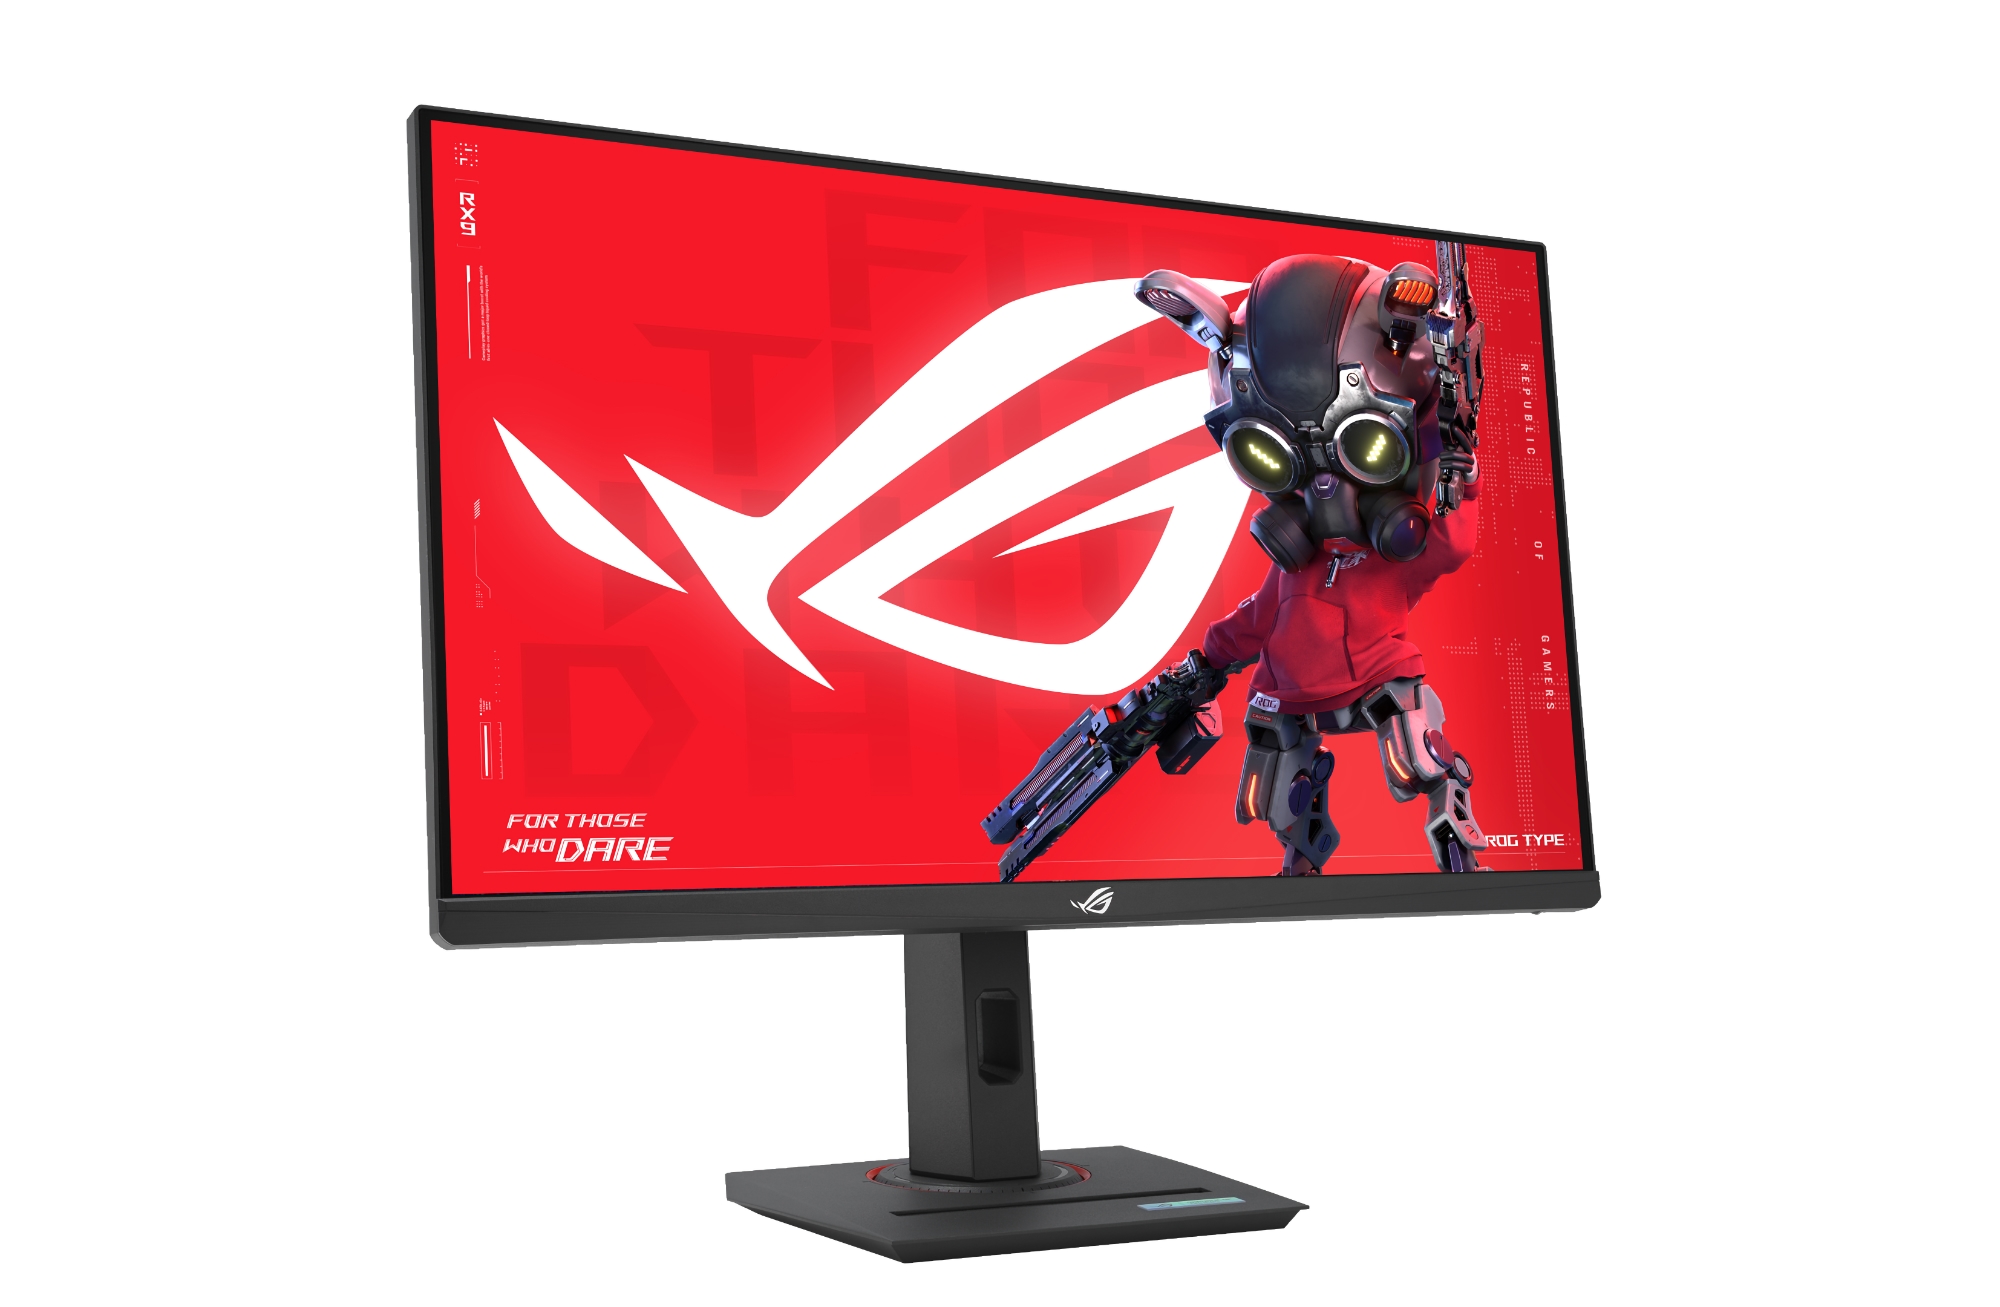 ASUS ROG Strix XG27UCG: 27-inch 4K resolution gaming monitor with up to 320Hz resolution